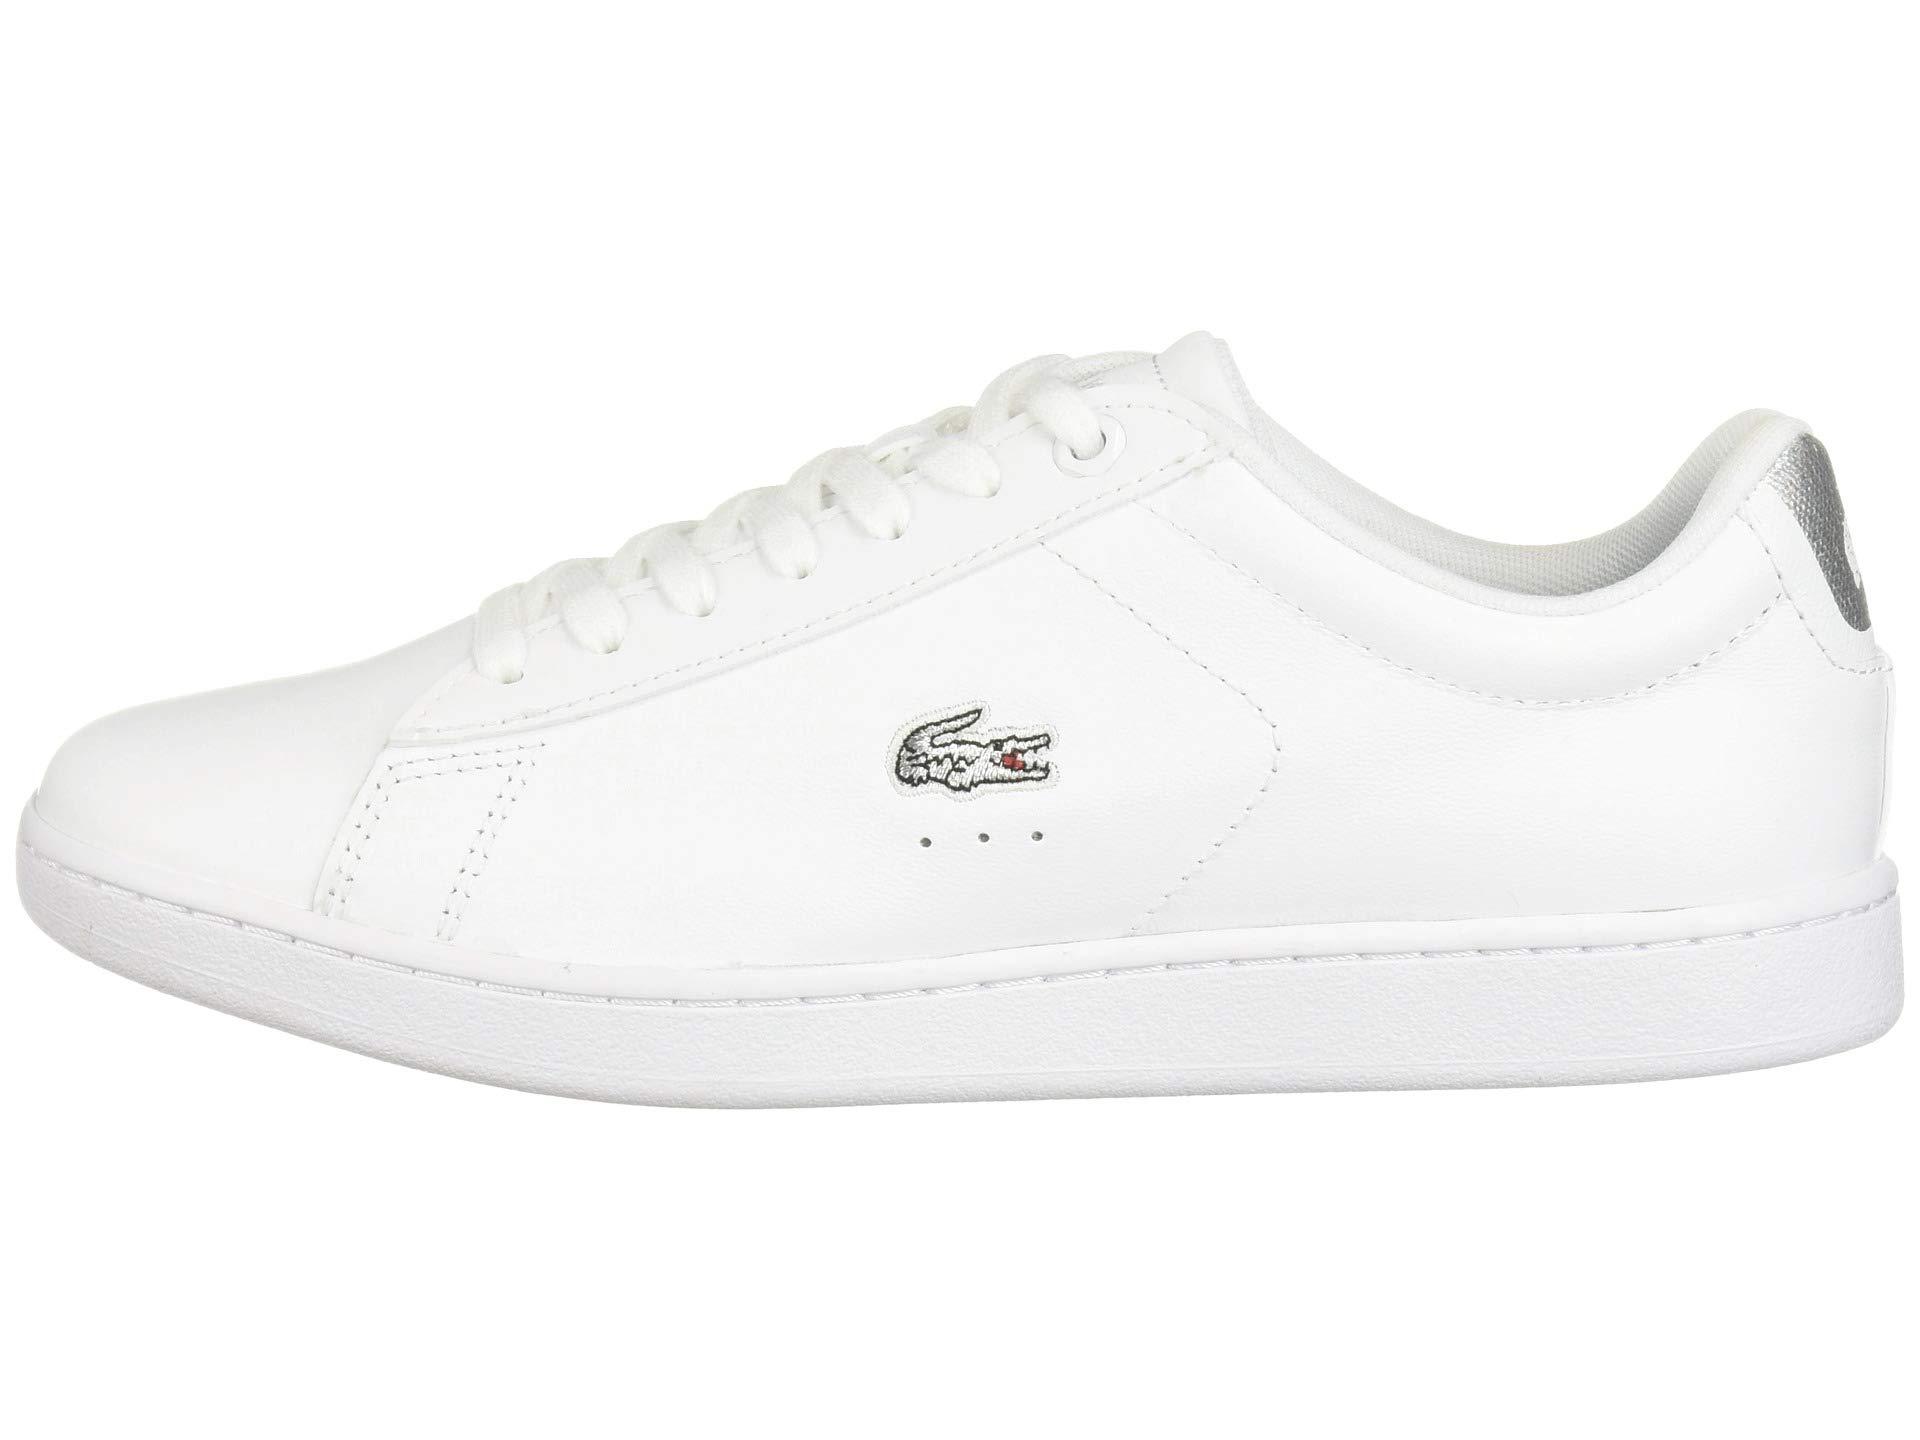 Lacoste Leather Carnaby Evo 219 1 Sfa 